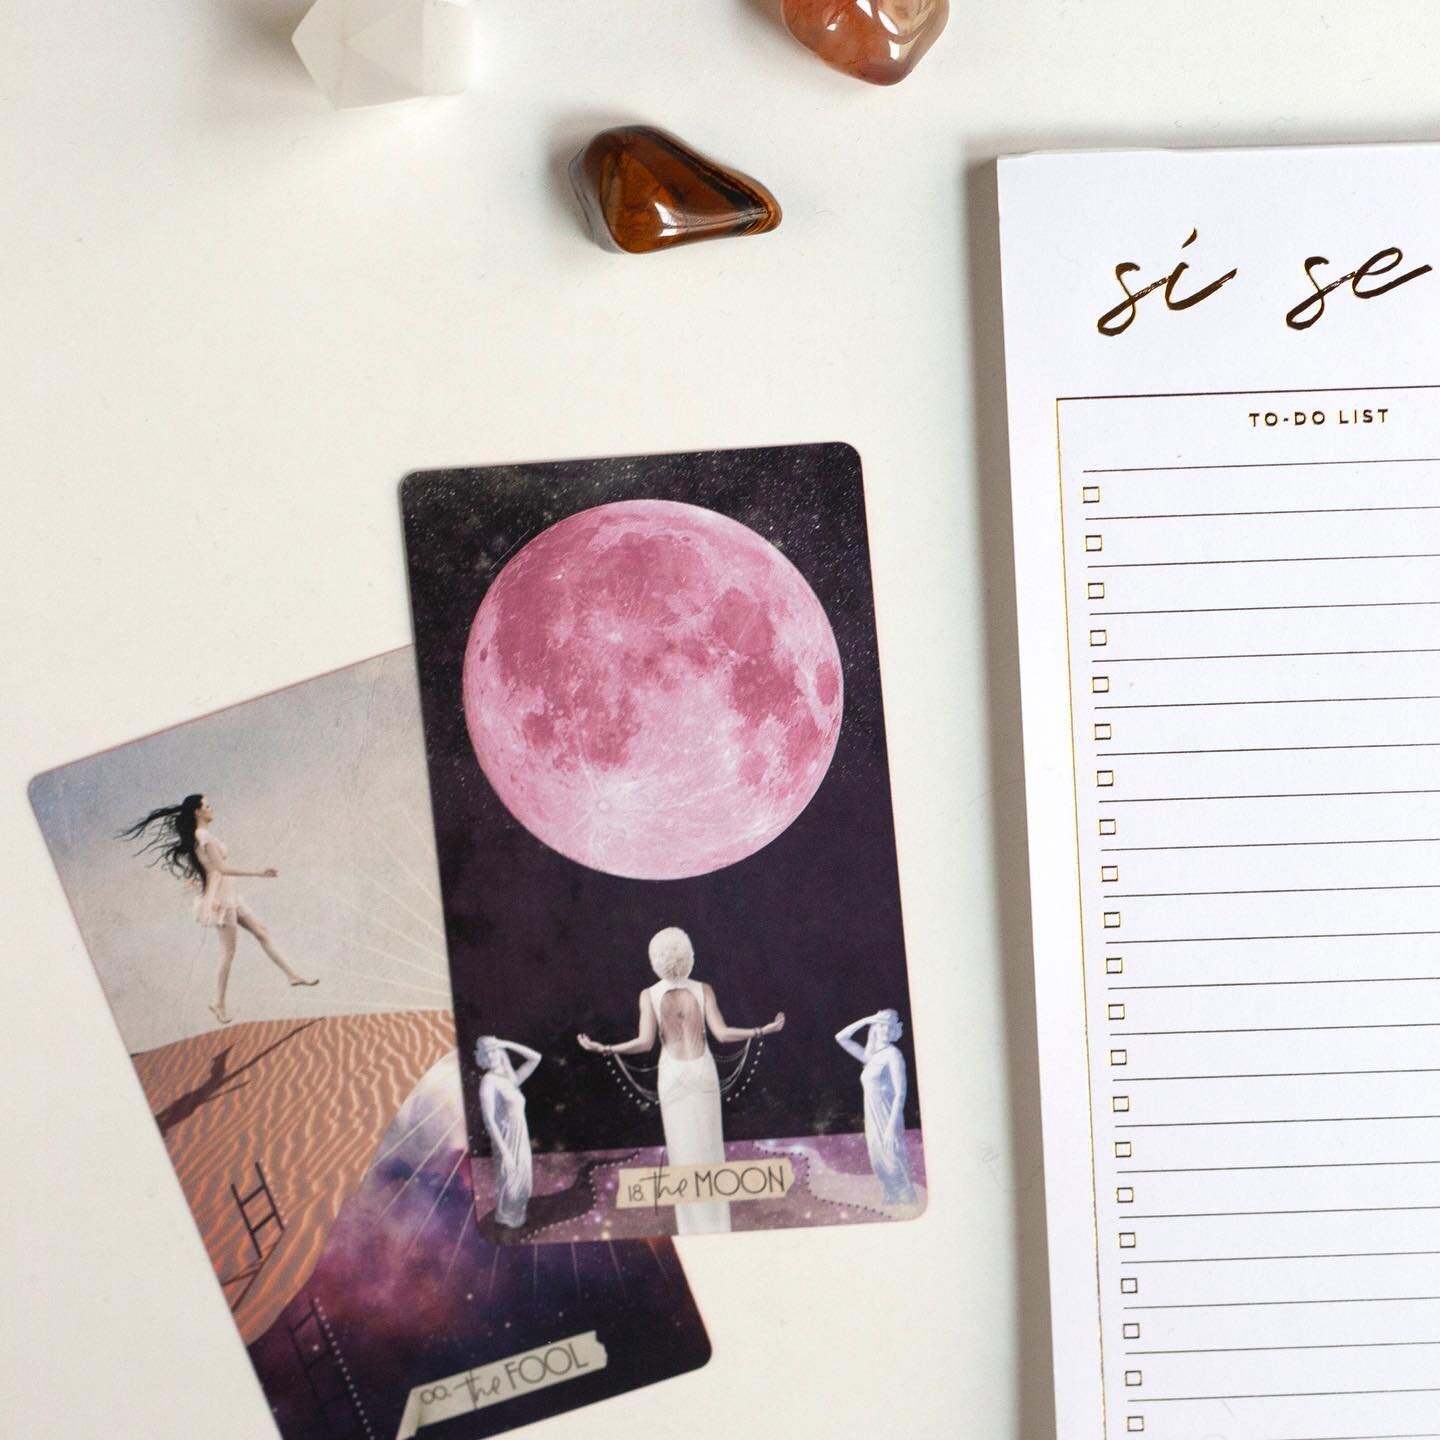 The full moon symbolizes a coming to completion, and this week we completed our last Dream + Scheme of the year! We worked with our Biz Besties to clarify their visions for 2022 and now we get to let the glitter settle before taking action. ✨ #fullmo